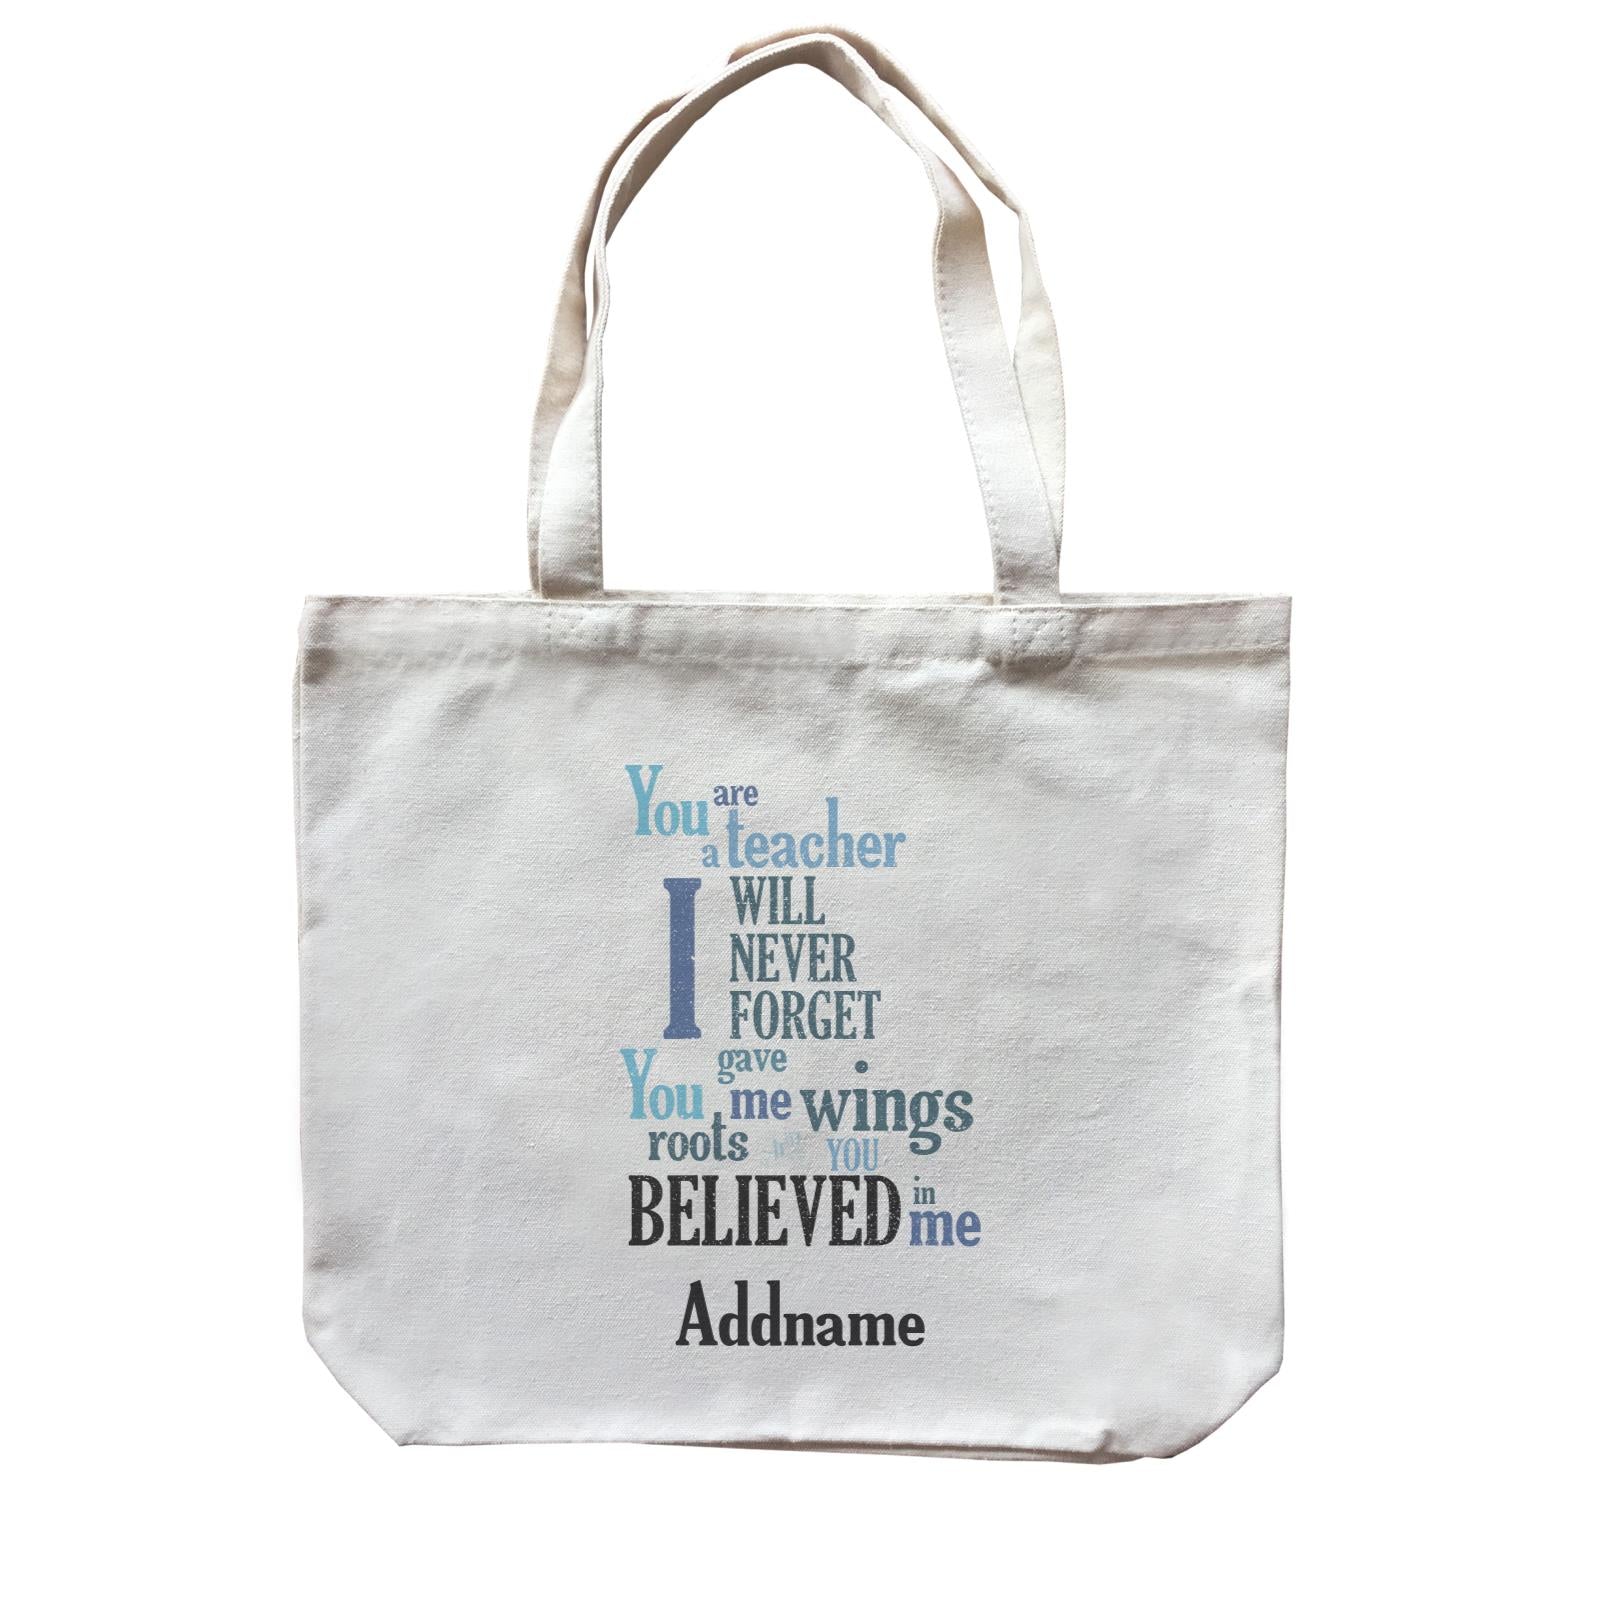 Super Teachers I Will Never Forget You Gave Me Wings Roots And You Believed In Me Addname Canvas Bag